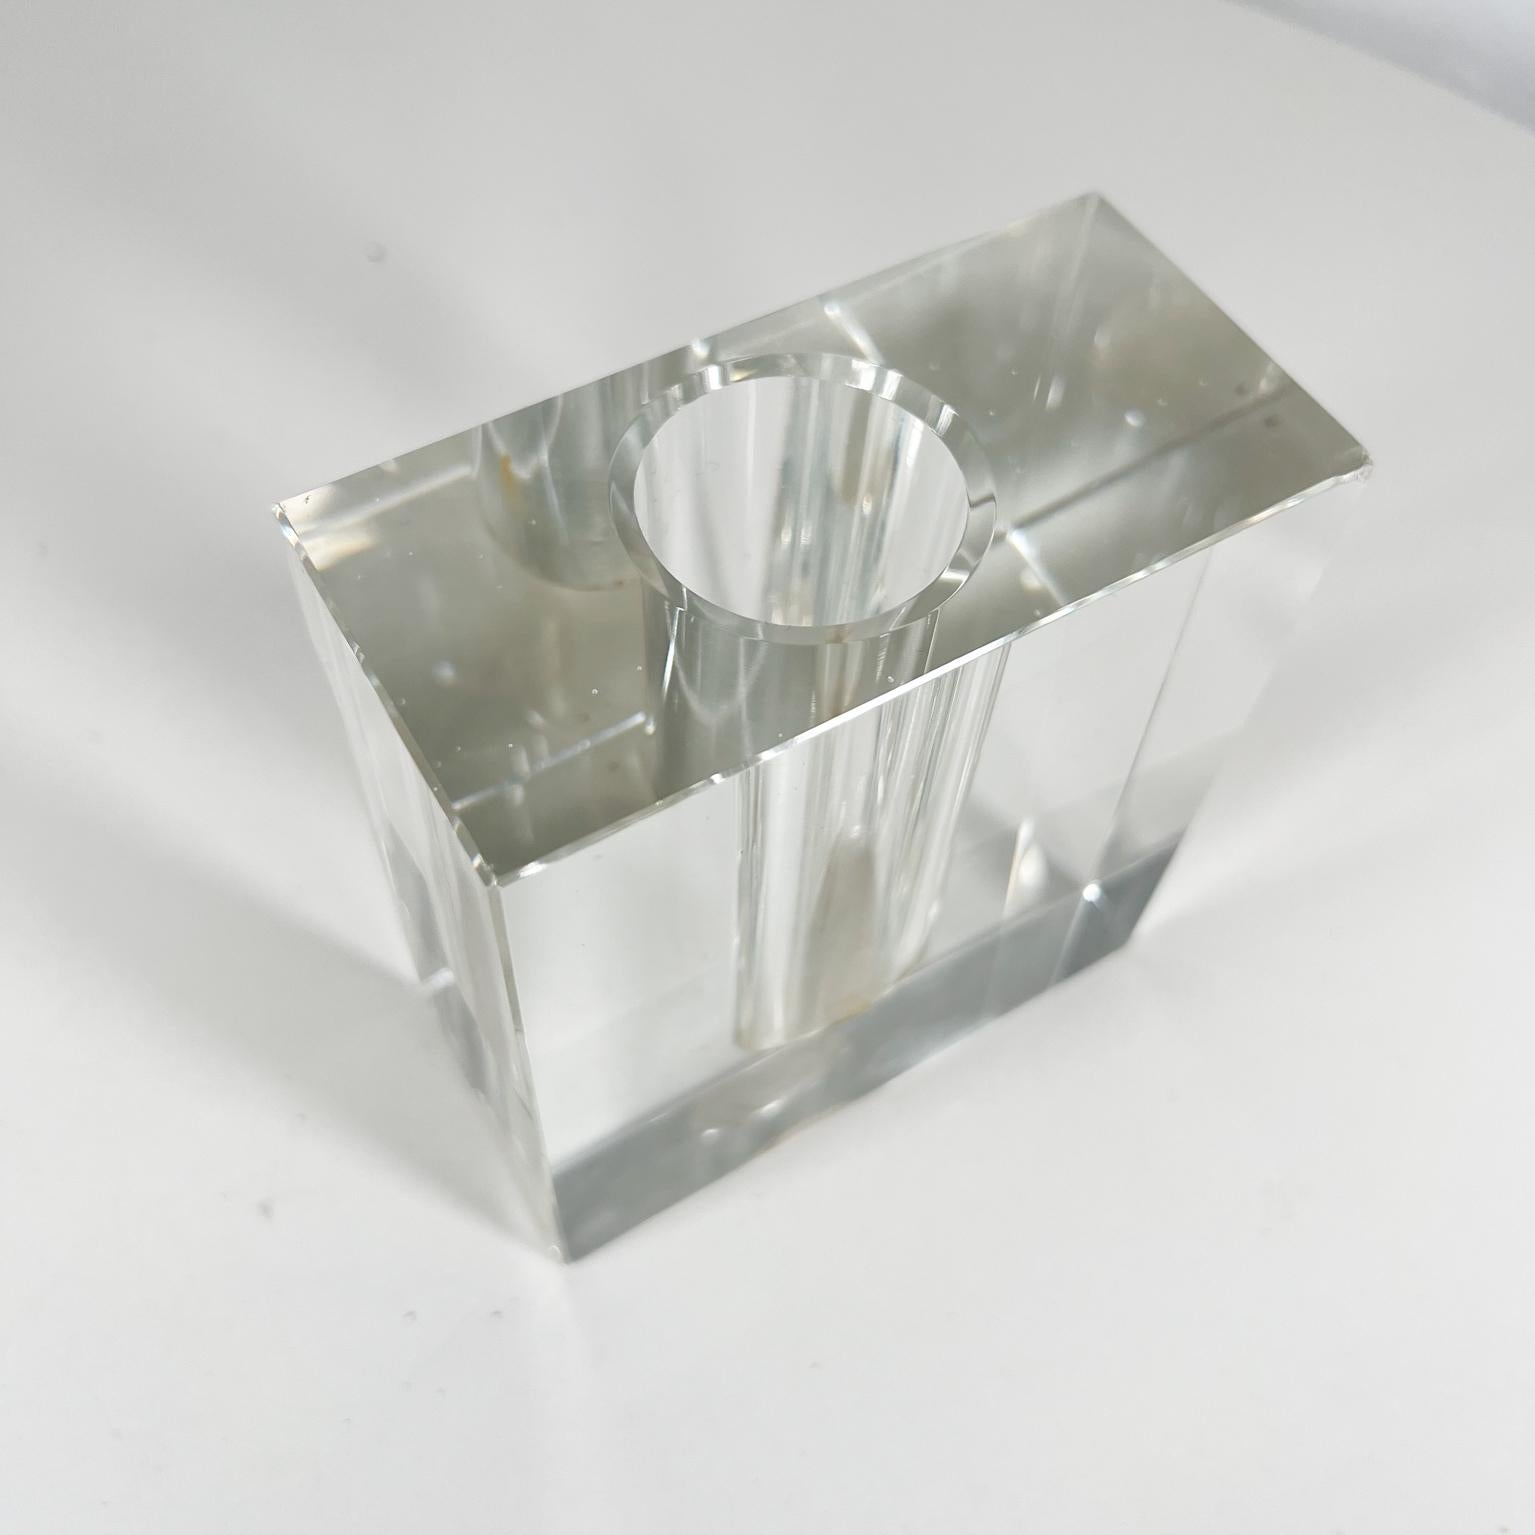 Late 20th Century 1970s Modernist Sophisticated Bud Vase Clear Glass Rectangular Block